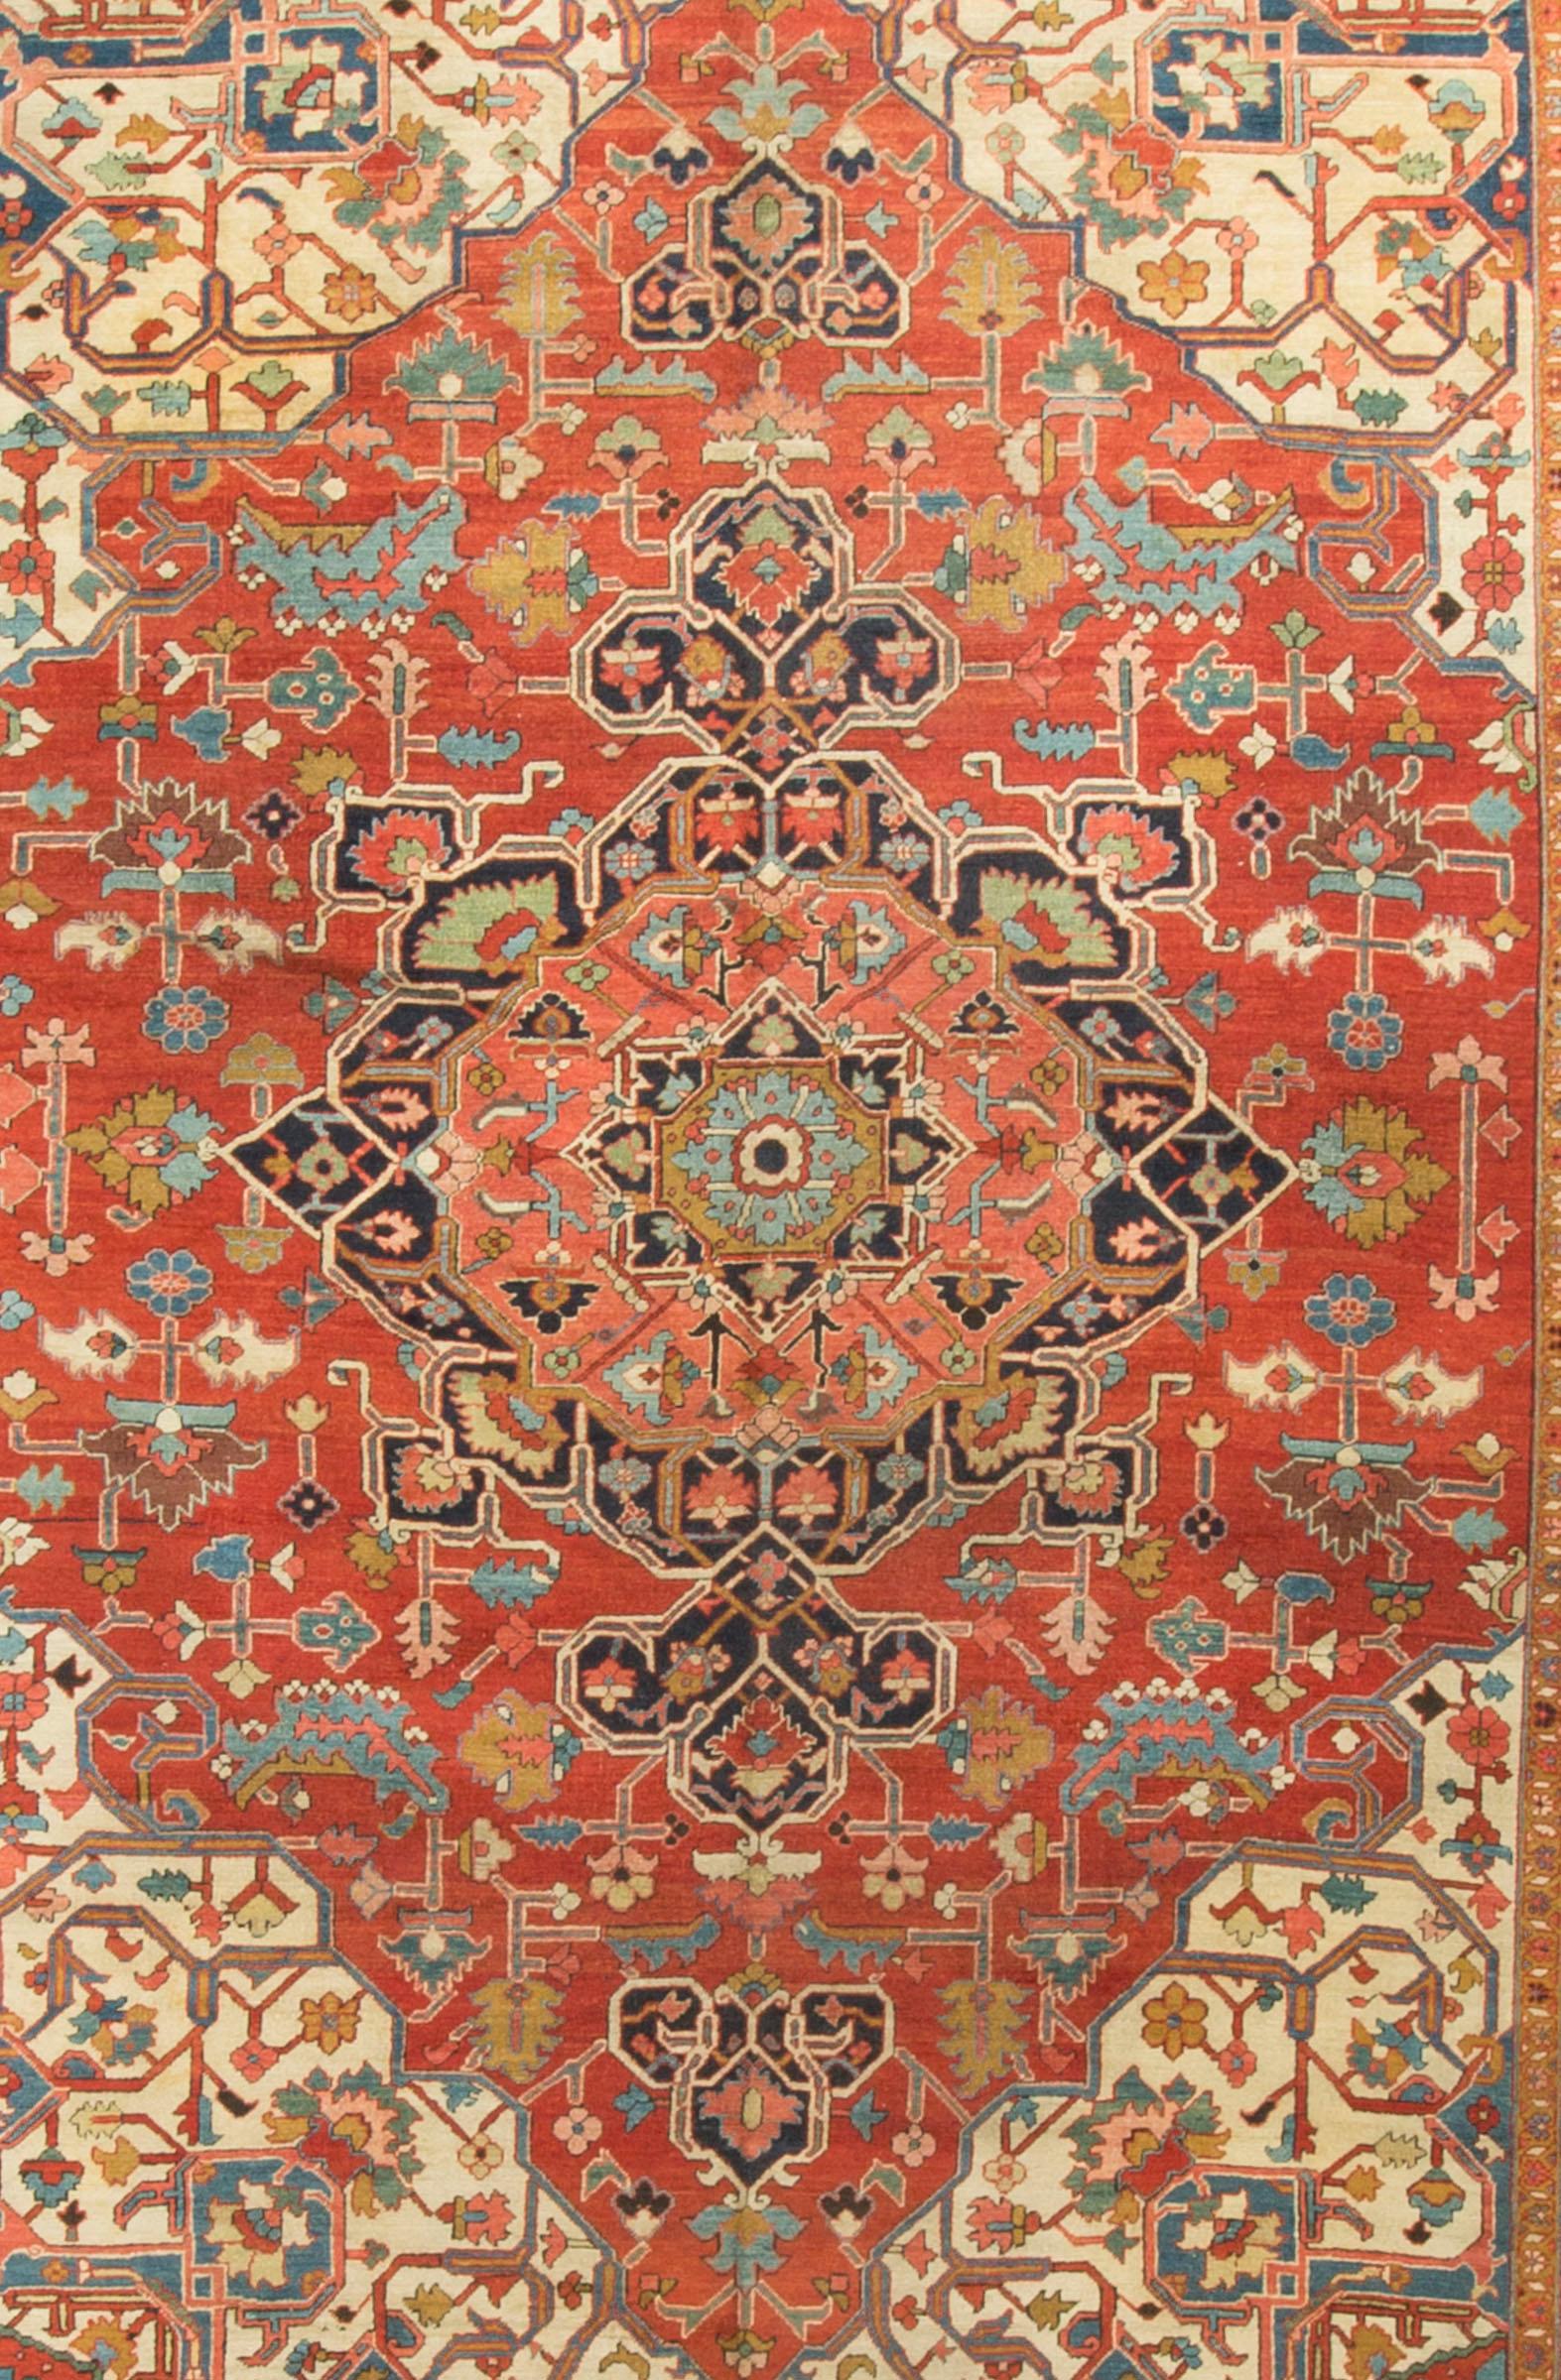 An antique circa 1890 Heriz Serapi rug with the traditional and perpetually fashionable geometric patterns. Size: 8'9 x 12'9